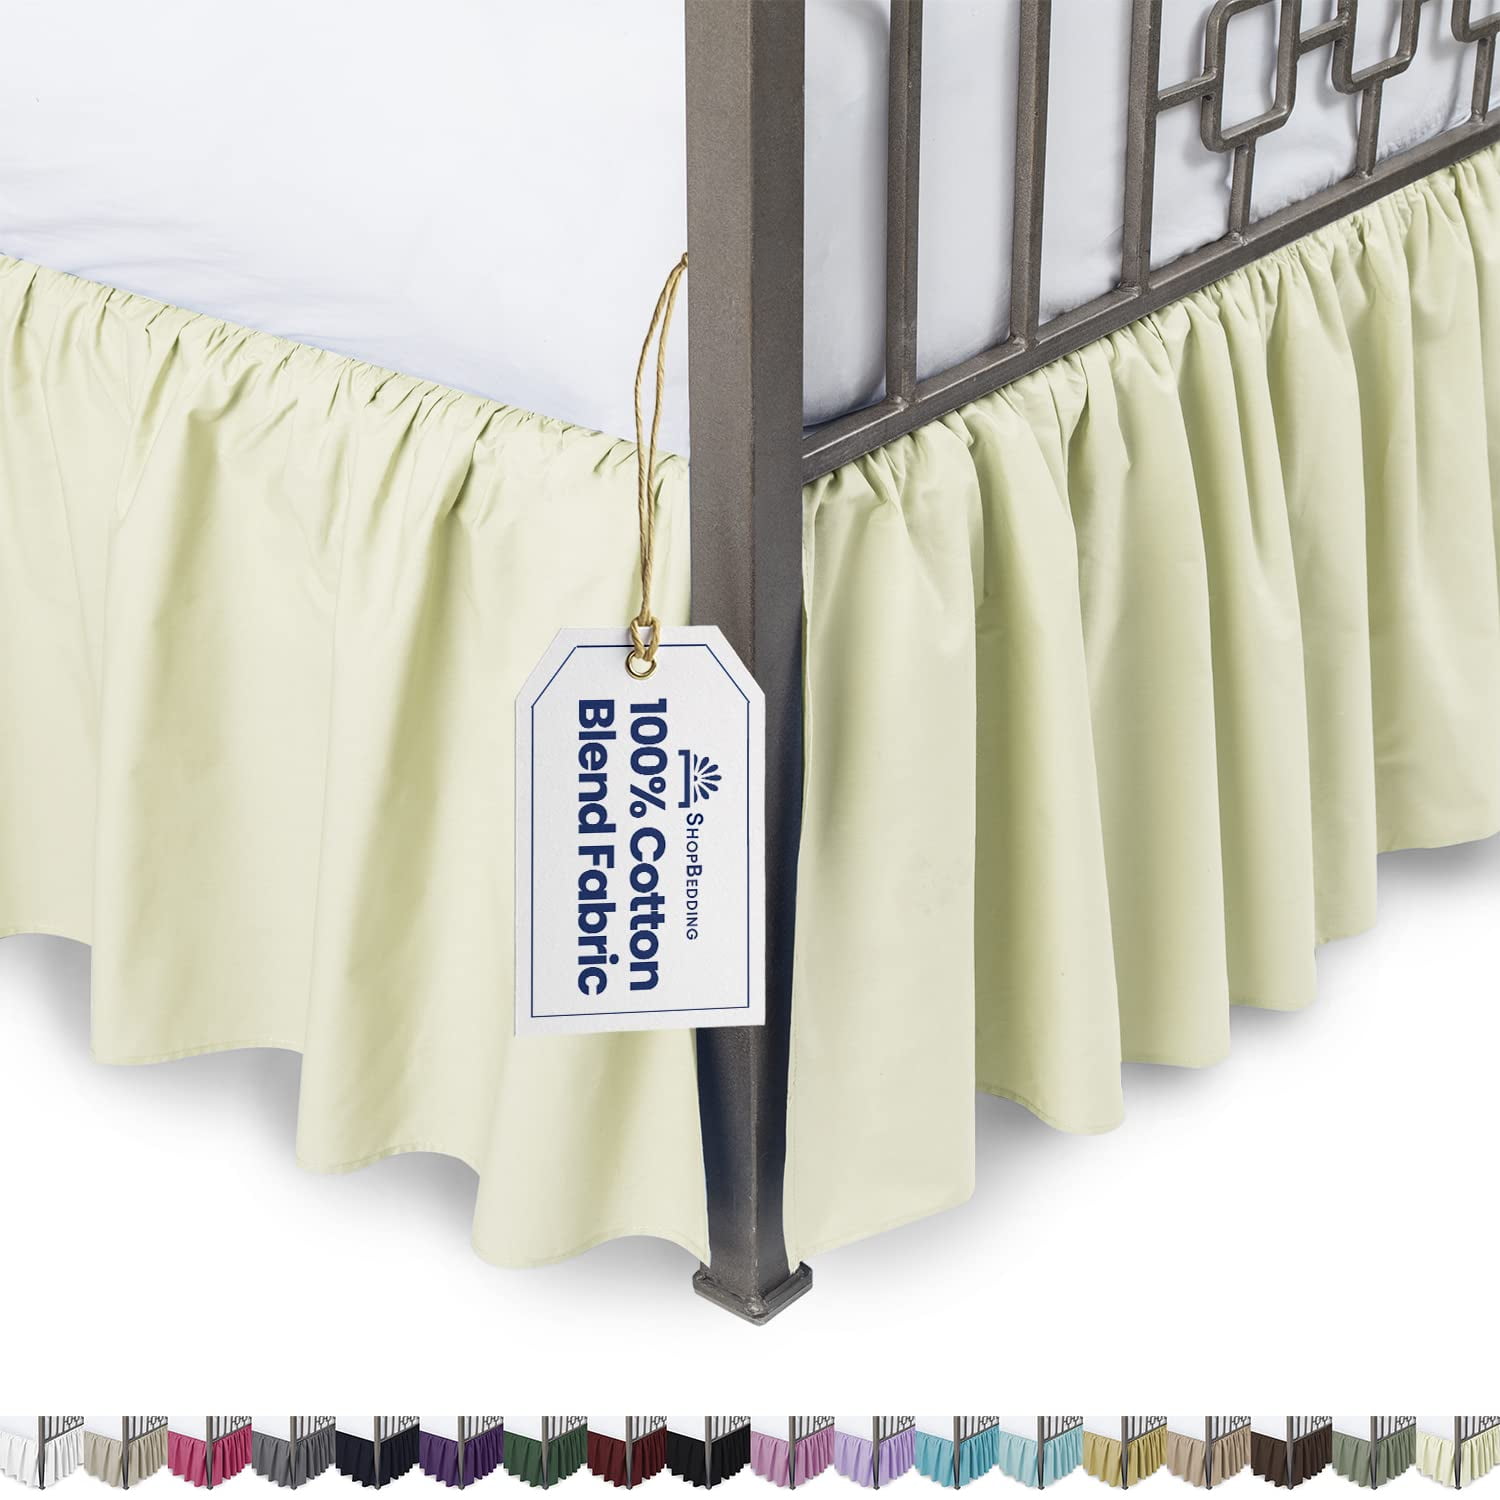 Ruffled Bed Skirt with Split Corners - Queen, Bone, 21 Inch Drop Cotton  Blend Bedskirt (Available in 14 Colors) - Blissford Dust Ruffle -  Walmart.com